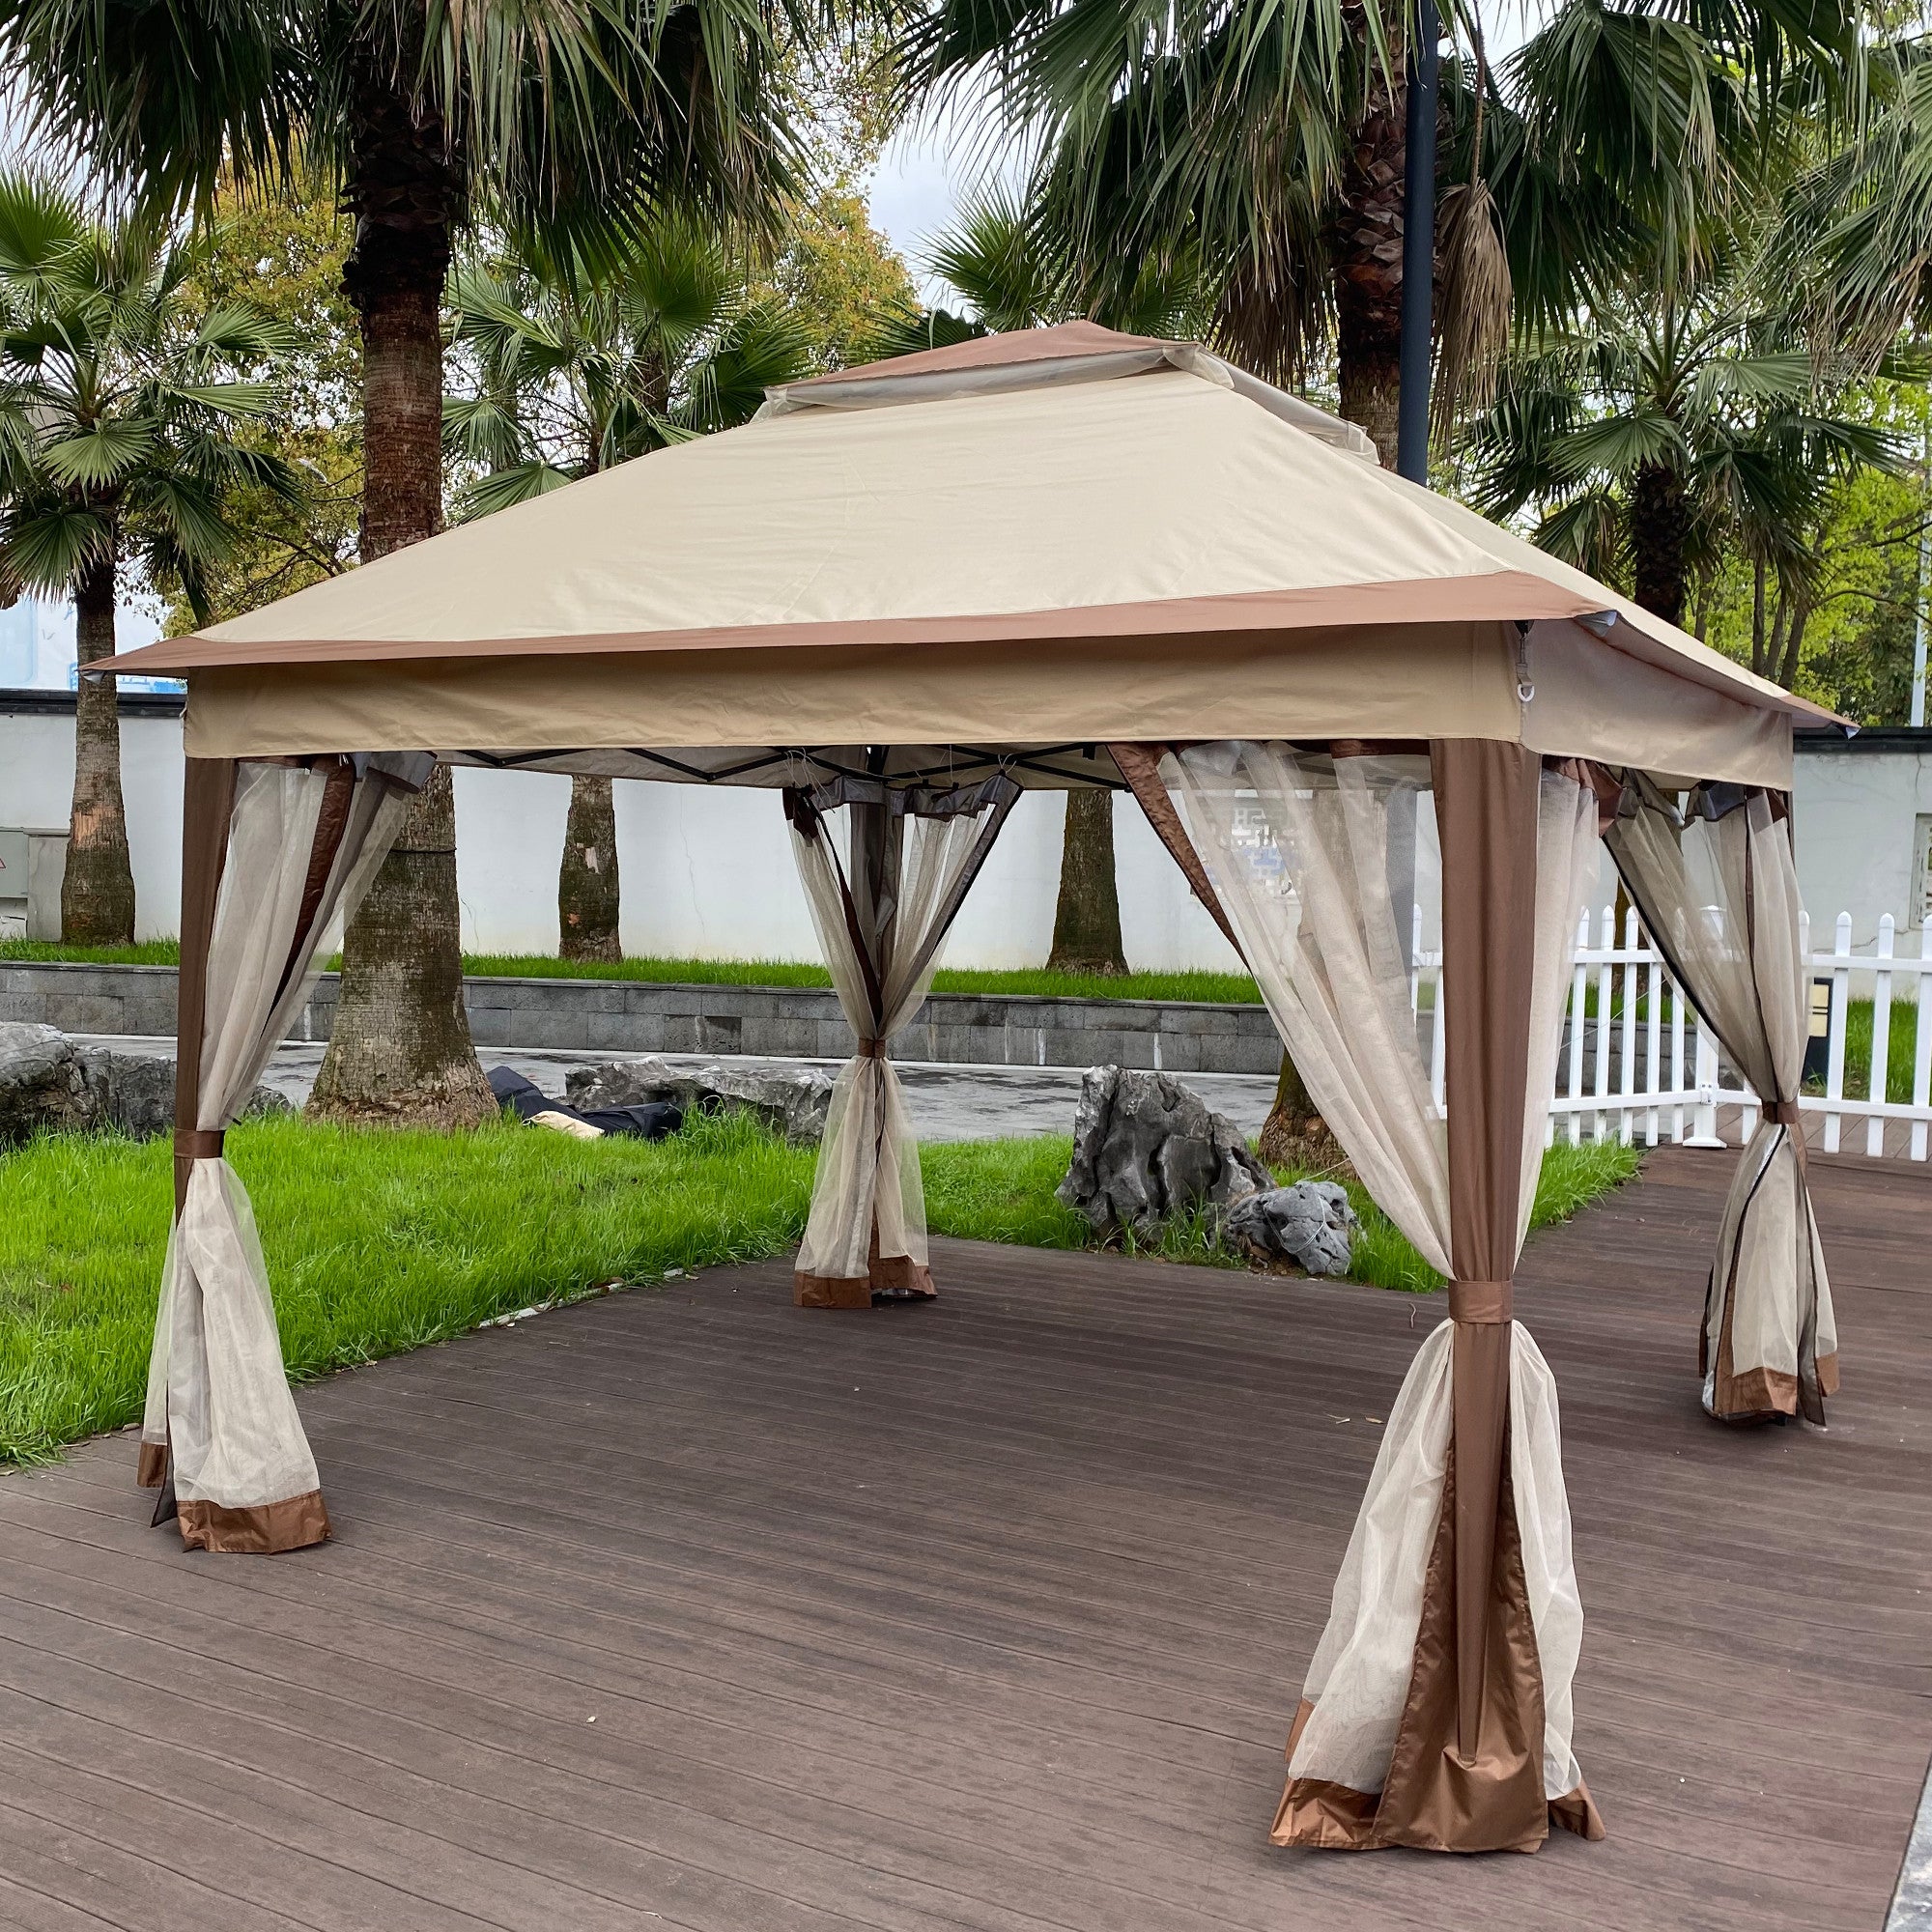 [KGORGE Plus]Outdoor 11ft x 11ft Pop Up Gazebo Canopy With Removable Zipper Netting, 2-Tier Soft Top Event Tent, Suitable For Patio Backyard Garden Camping Area, Coffee